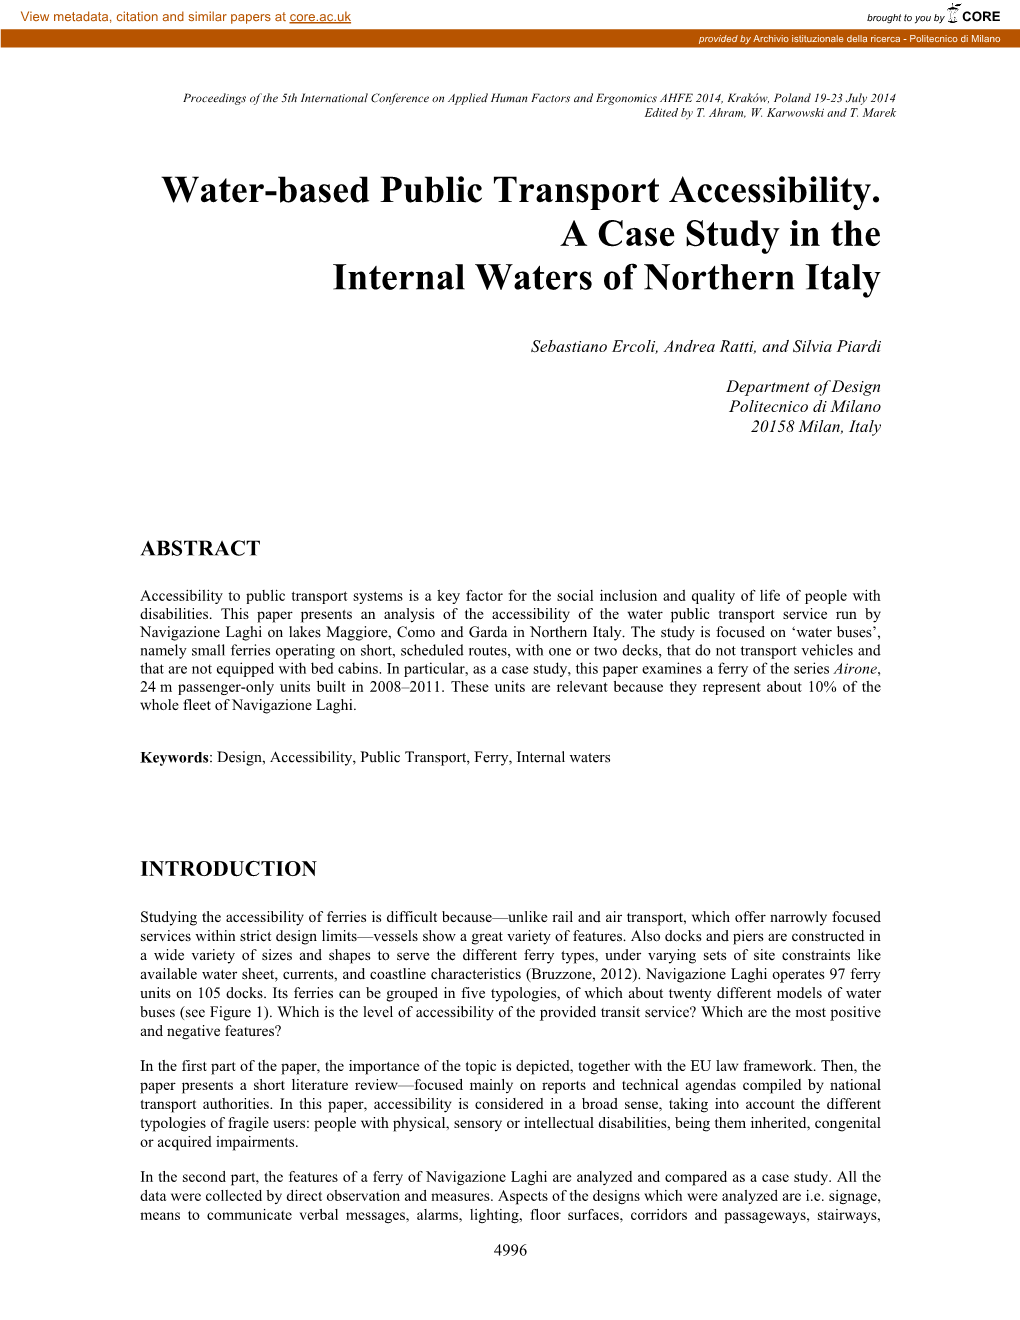 Water-Based Public Transport Accessibility. a Case Study in the Internal Waters of Northern Italy